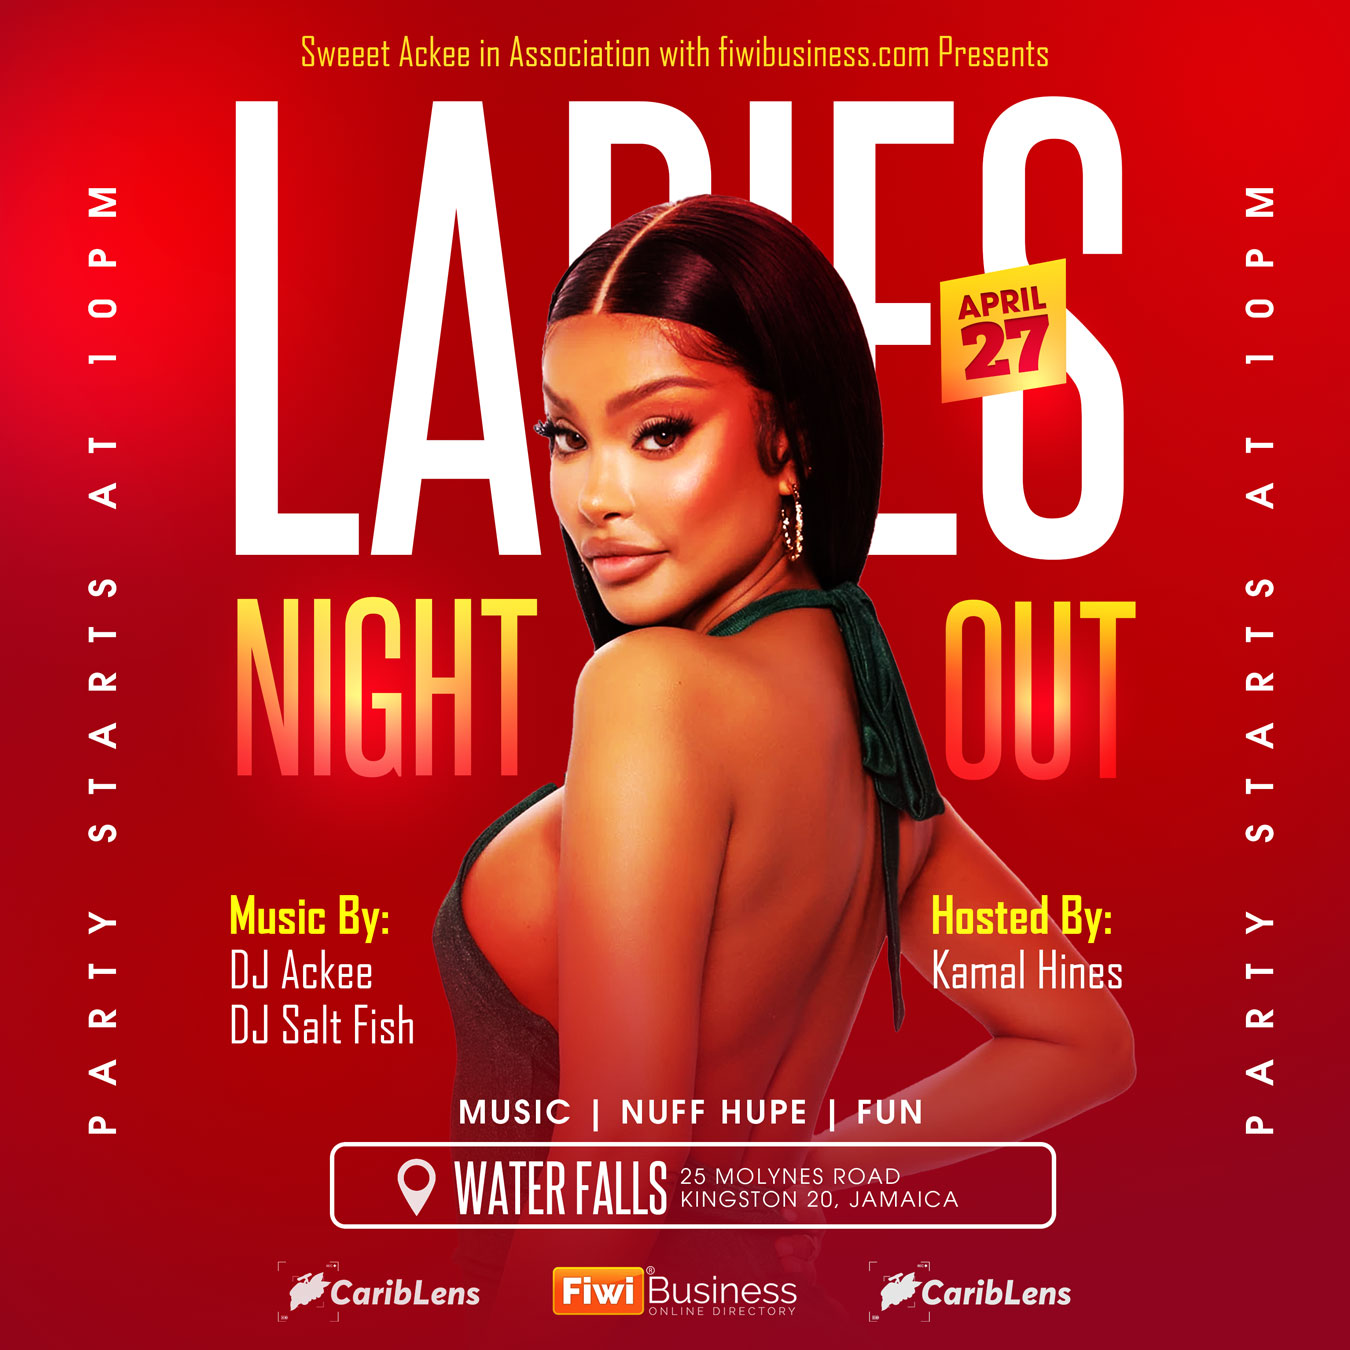 Print And Social Media Ladies Night Out Party Flyer Or Template Psd Free Download